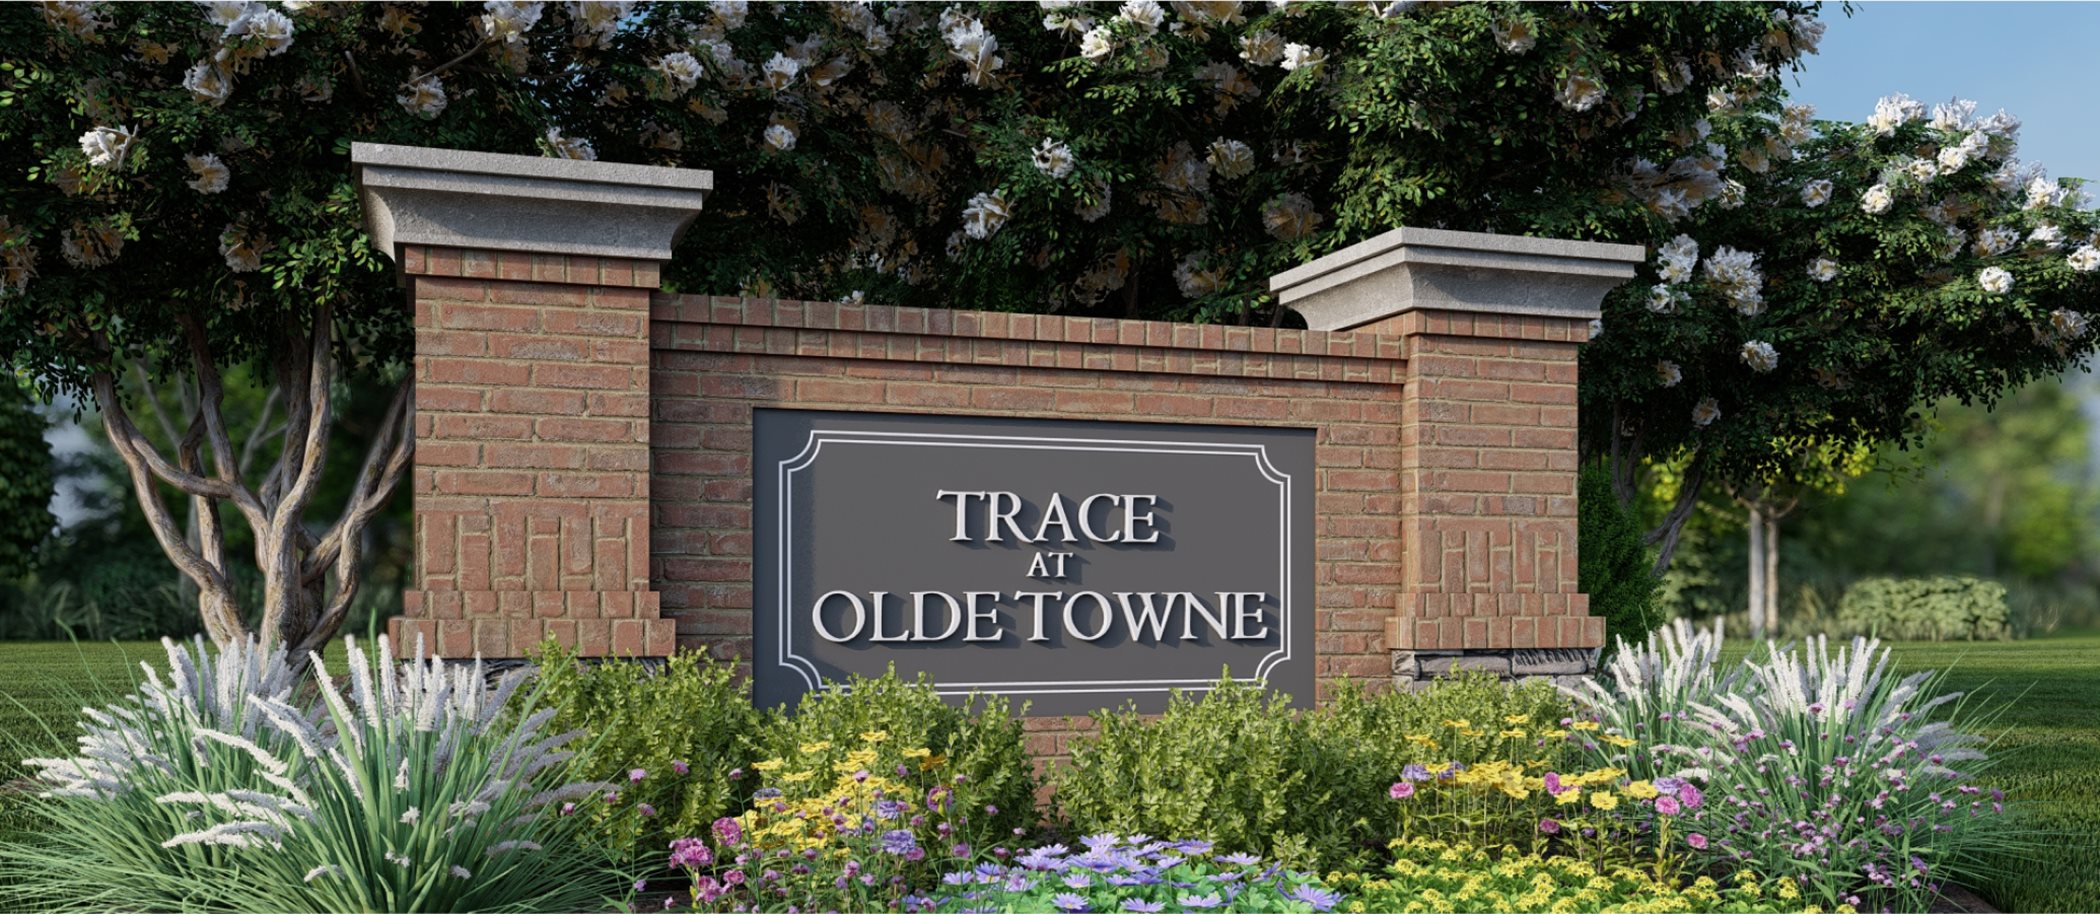 Trace at Old Towne entry monument